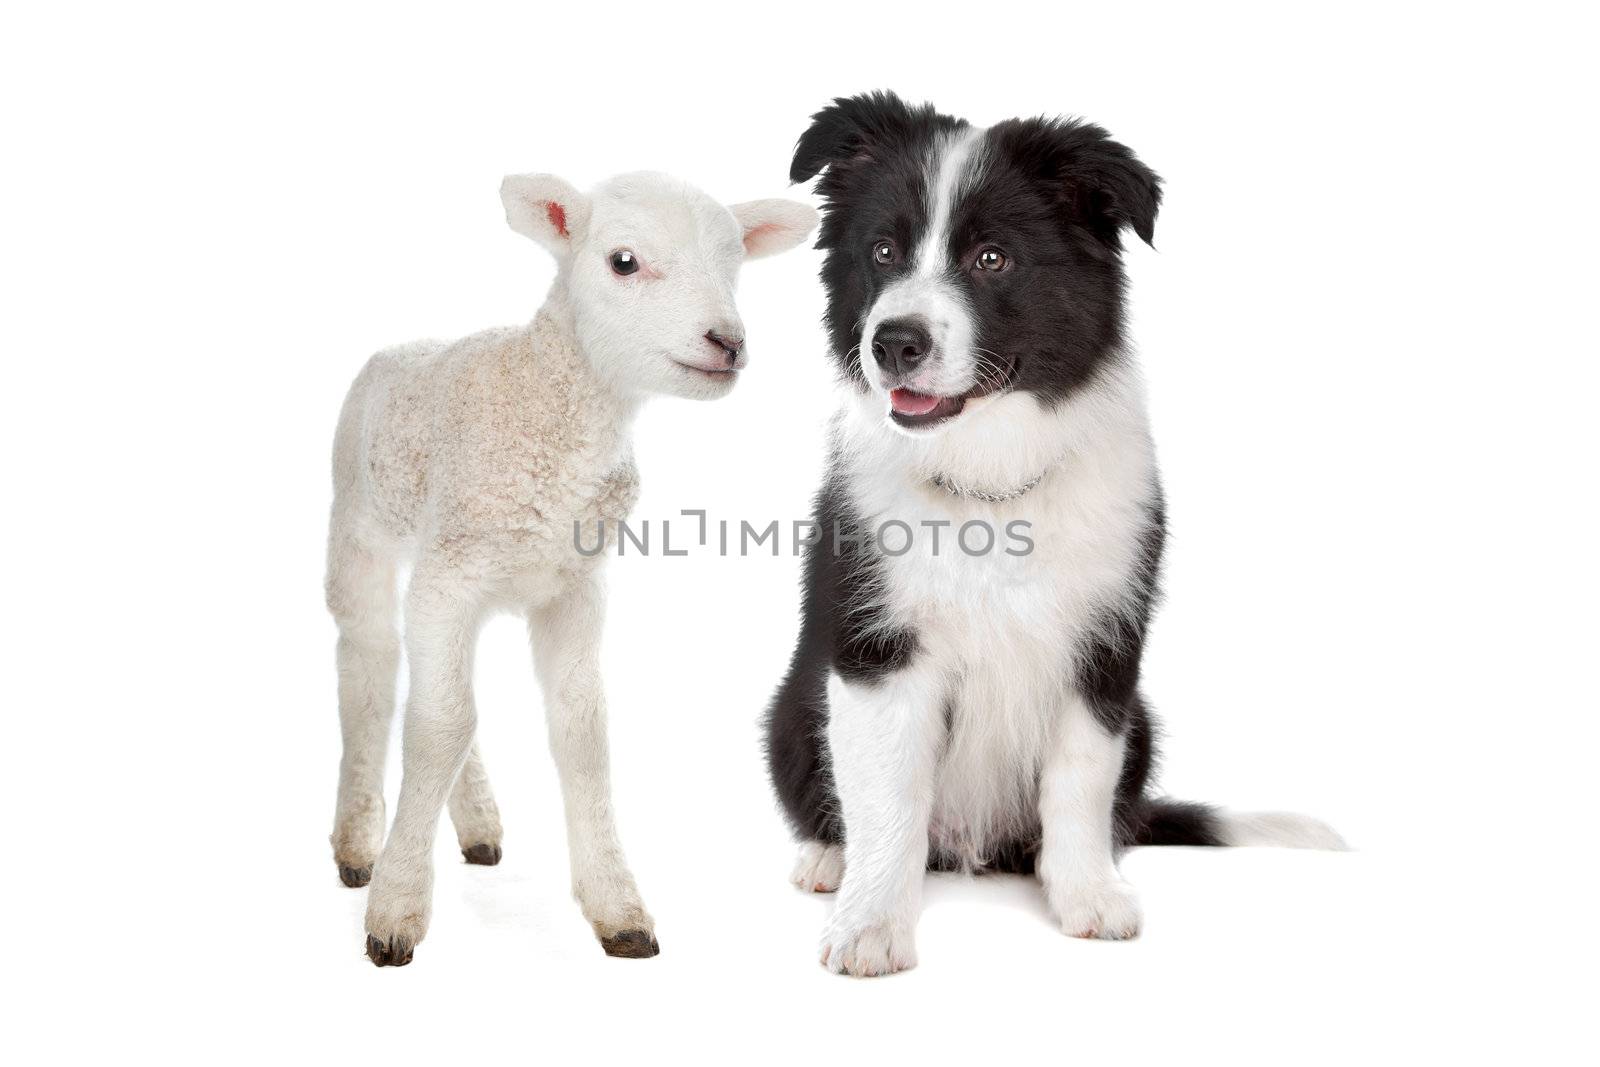 Lamb and a border collie puppy by eriklam